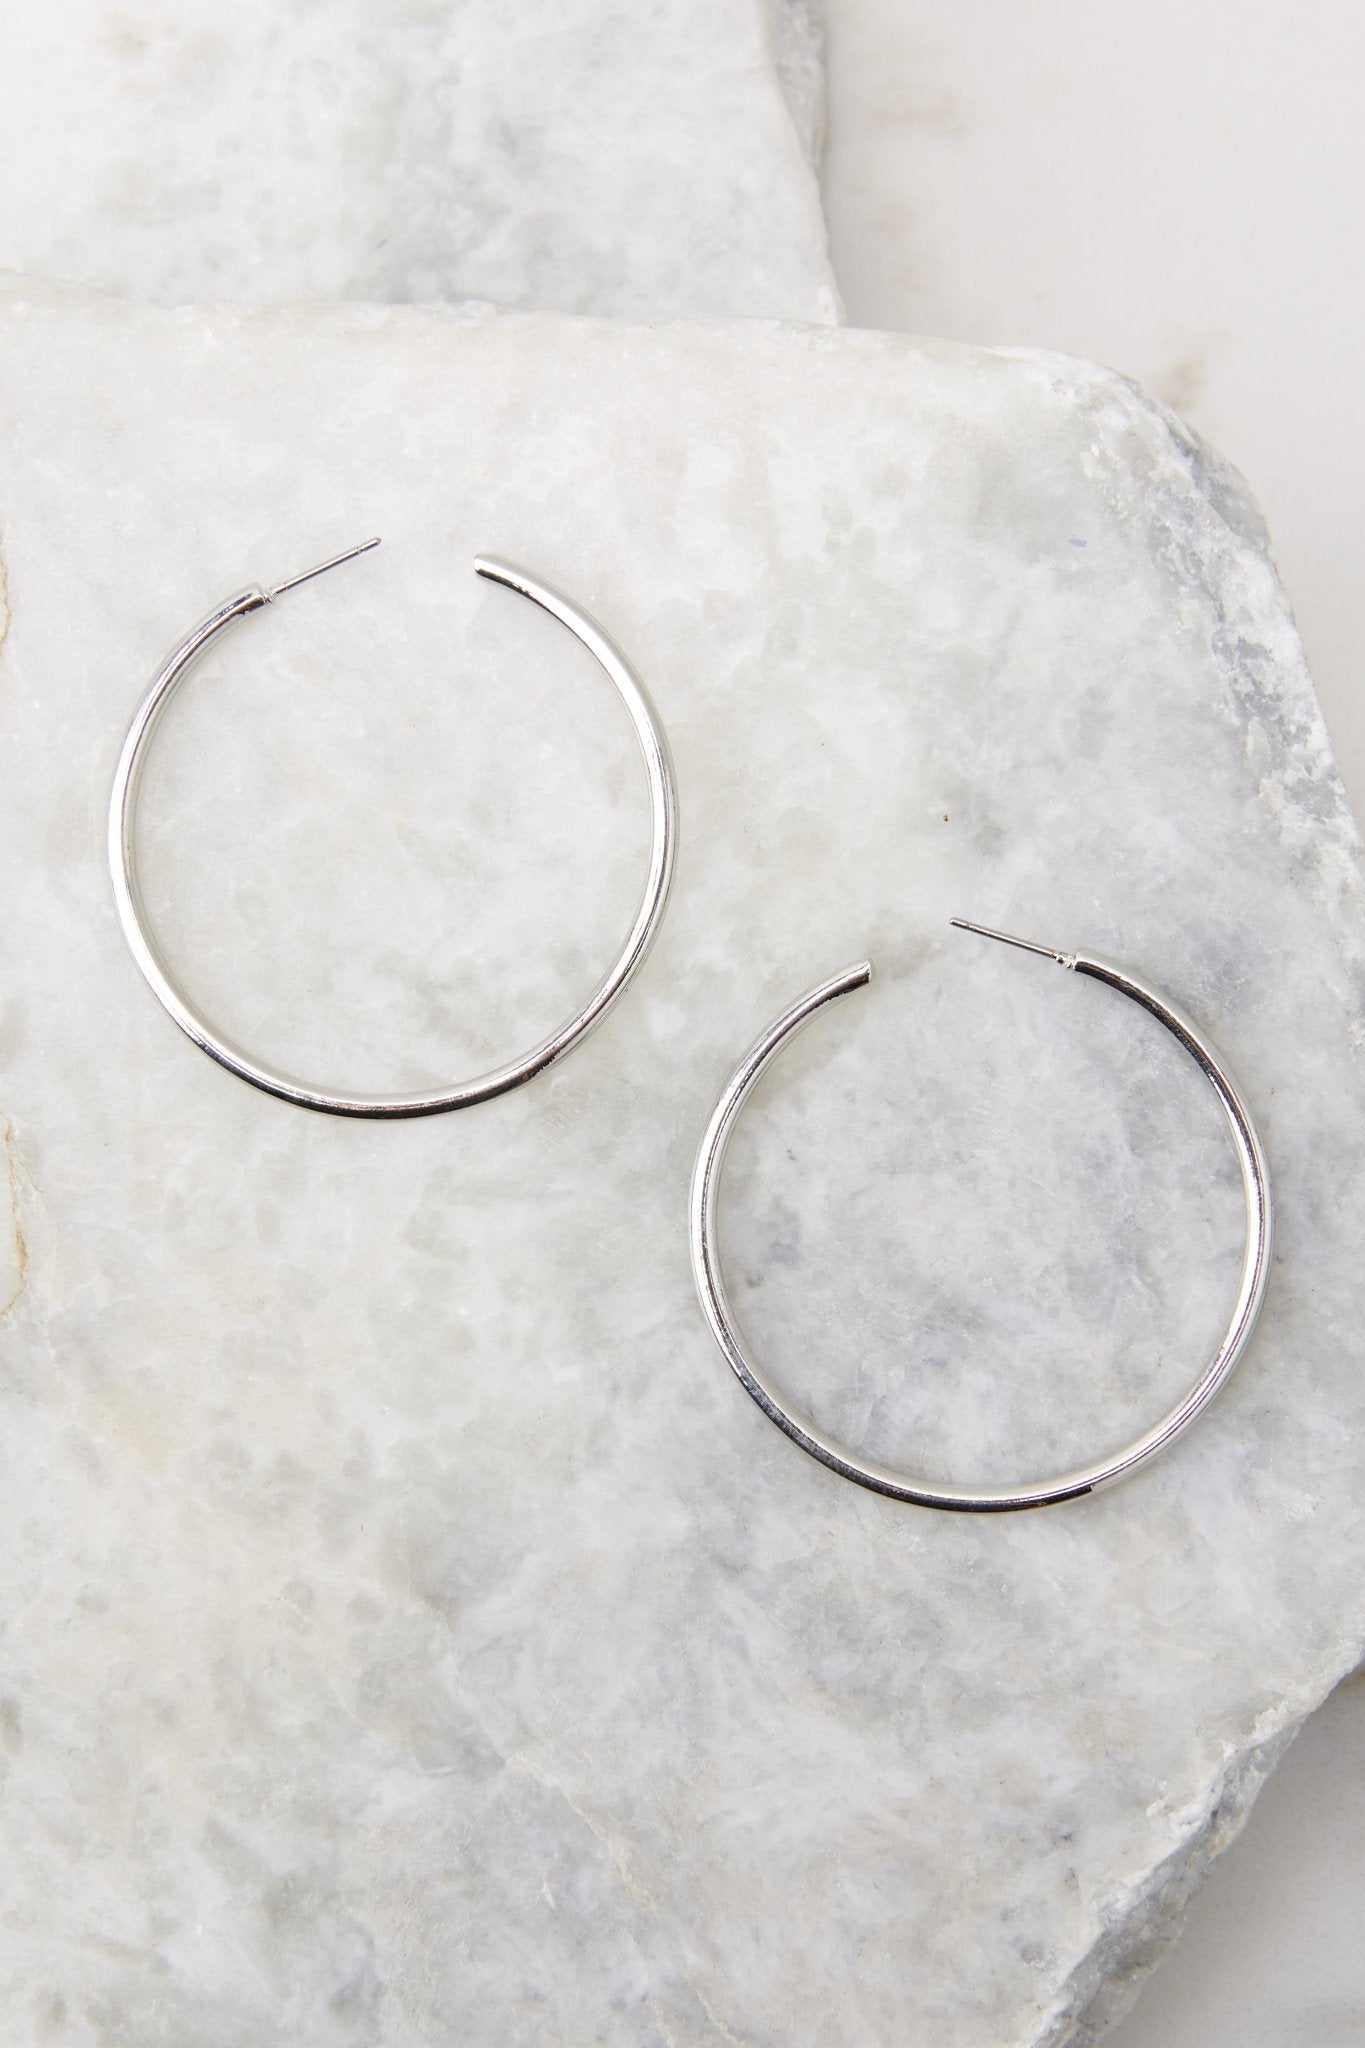 Detailed view of hoop earrings that feature a thin lightweight design, silver hardware, and a post secure backing.